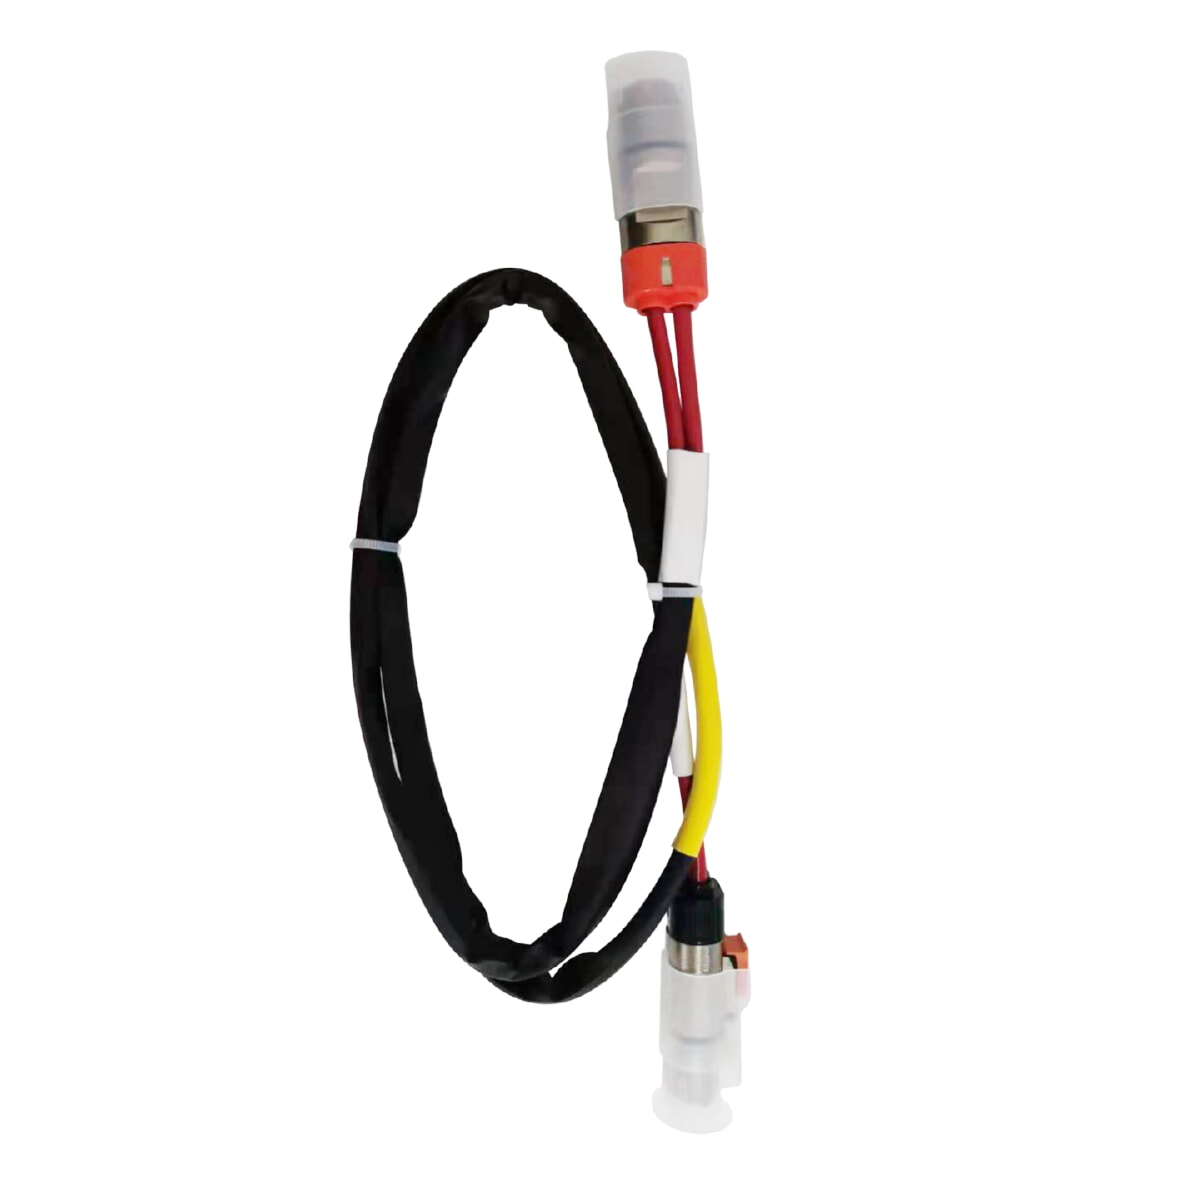 SolaX power cable for connecting 4xT30